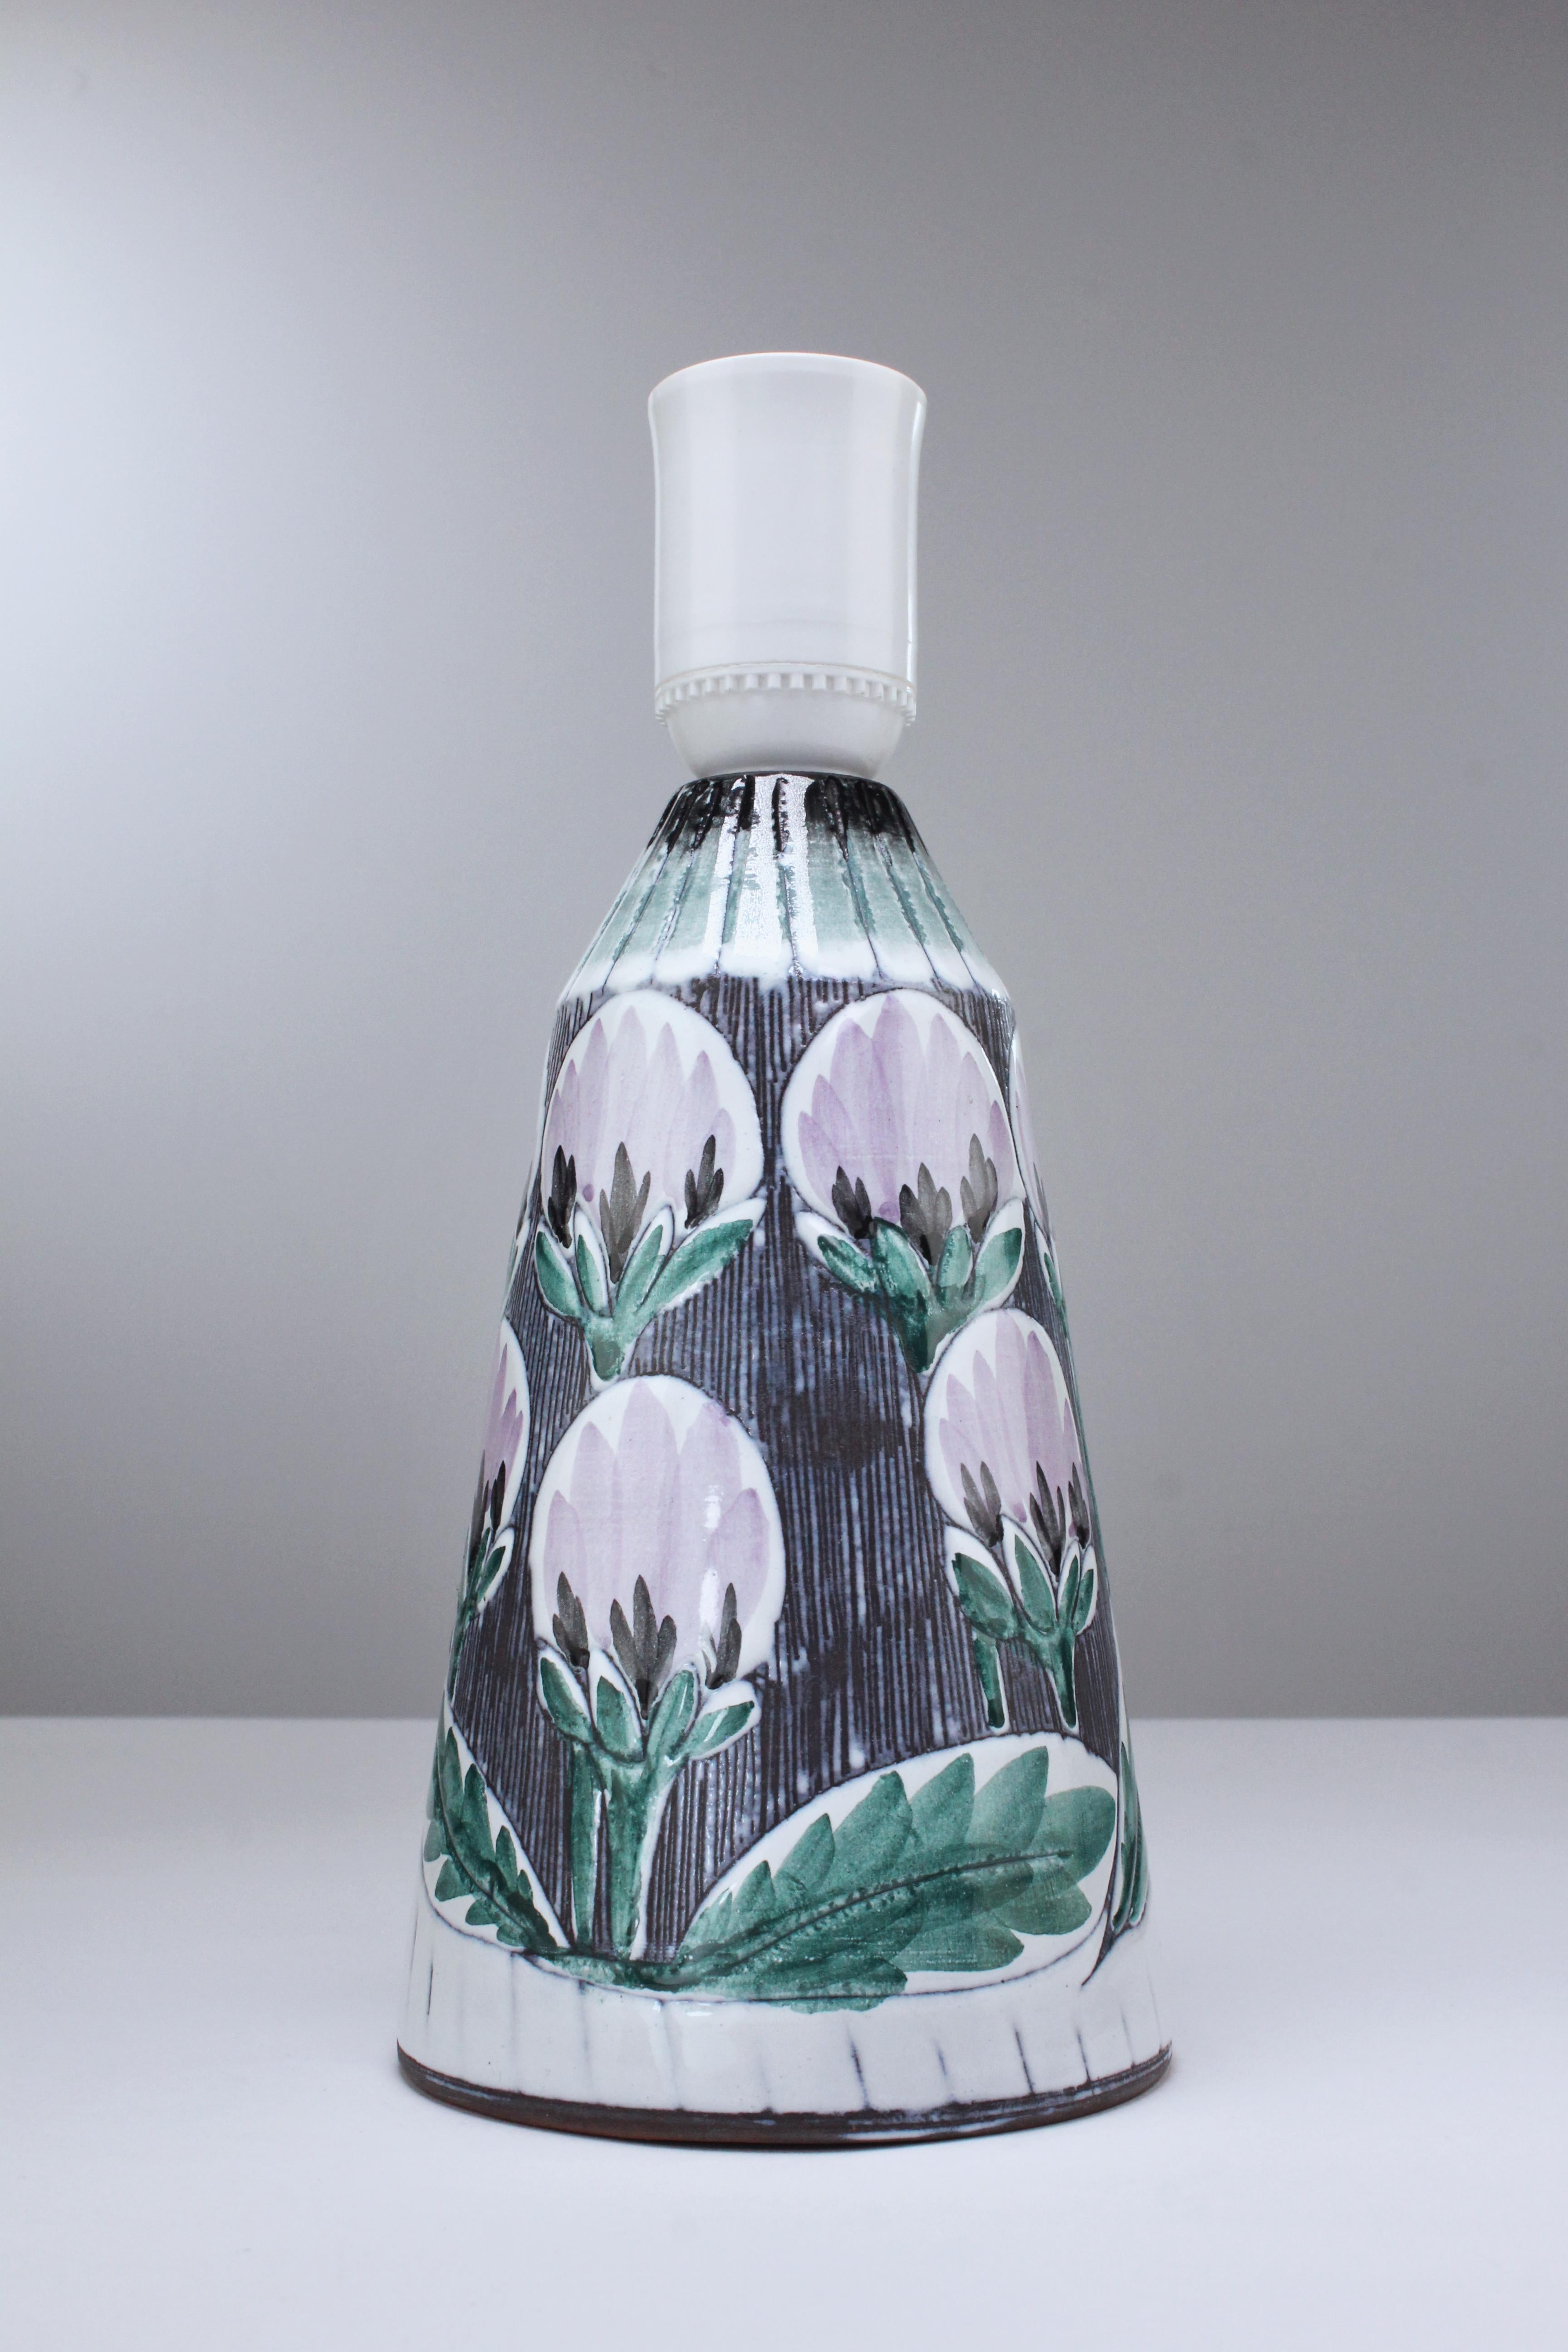 Two handmade Swedish mid century modern ceramic table lamps with white, lilac, green and dark grey glaze creating a pattern of flowers and leaves. Background has been decorated with the sgraffito technique that consists of fine lines carved into the